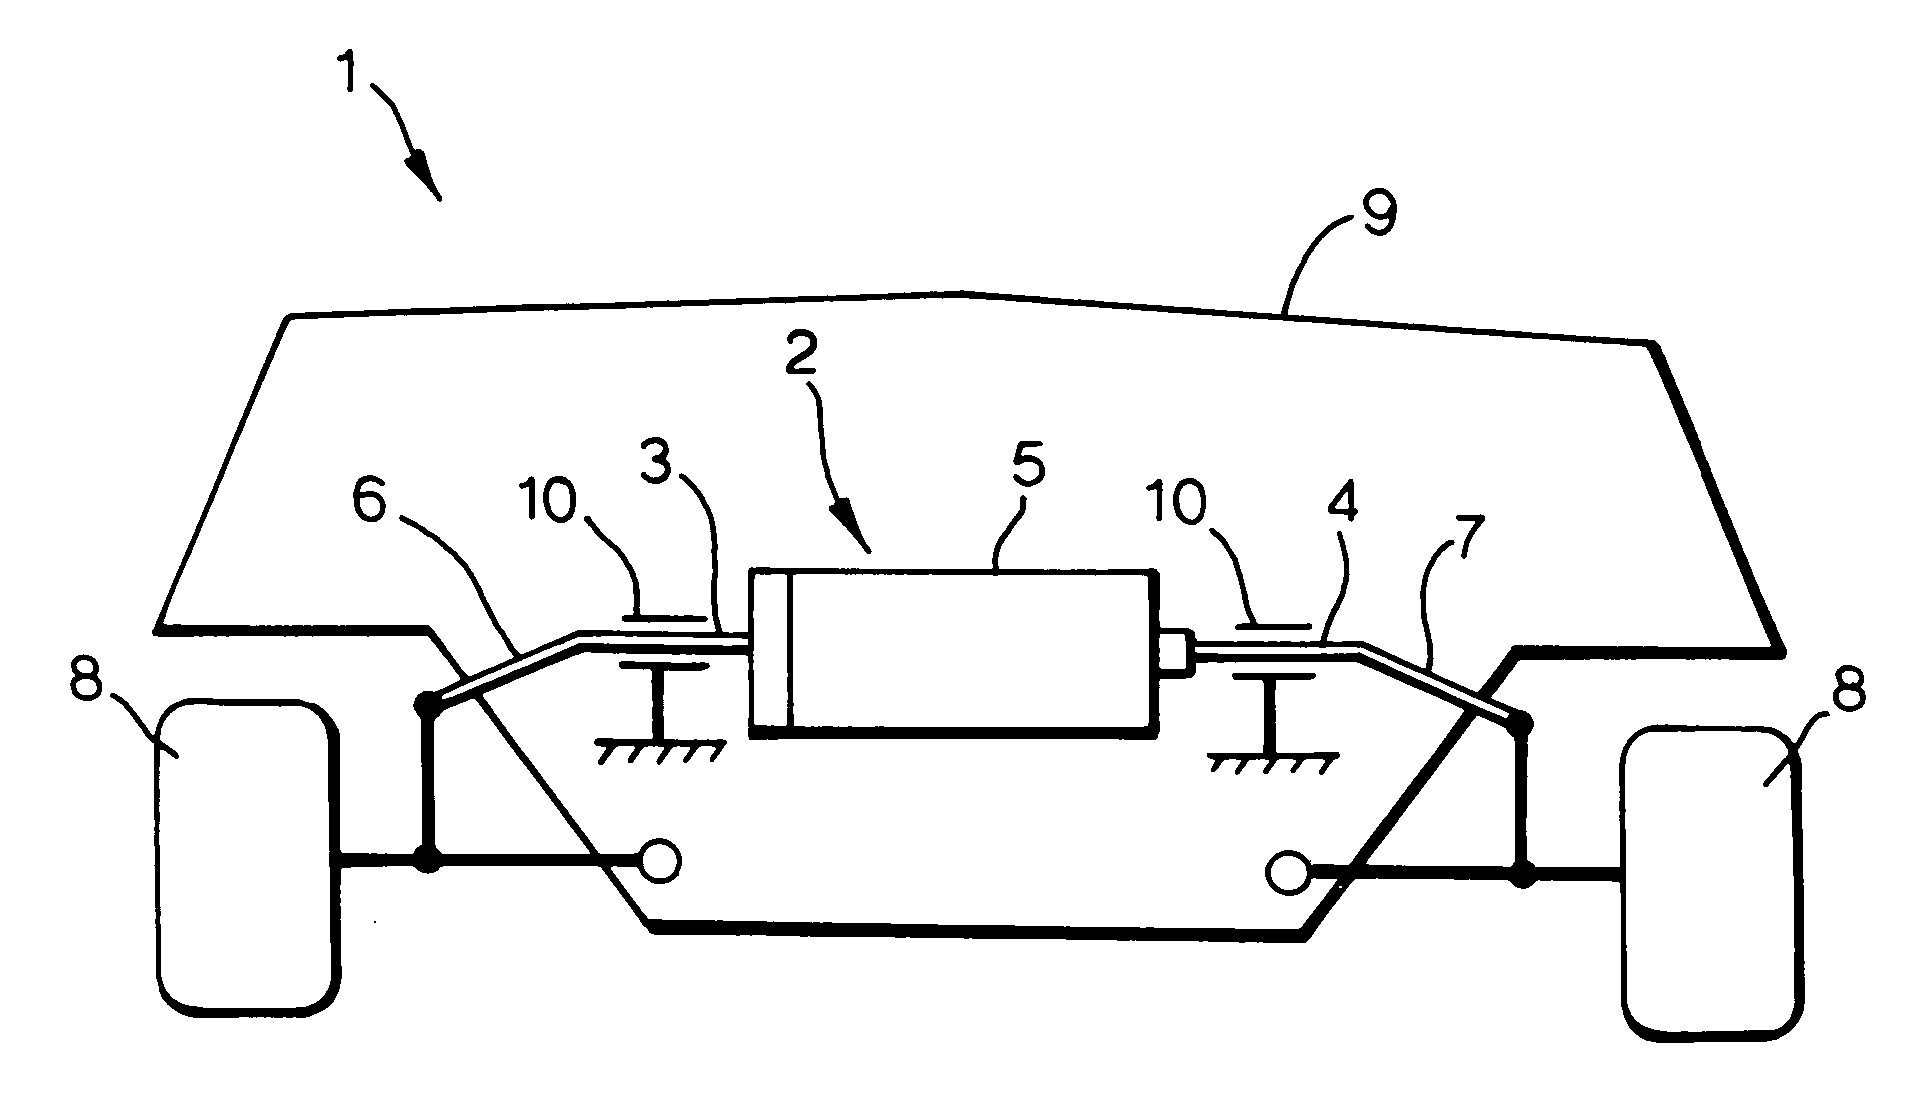 Coupling mechanism for anti-roll bar